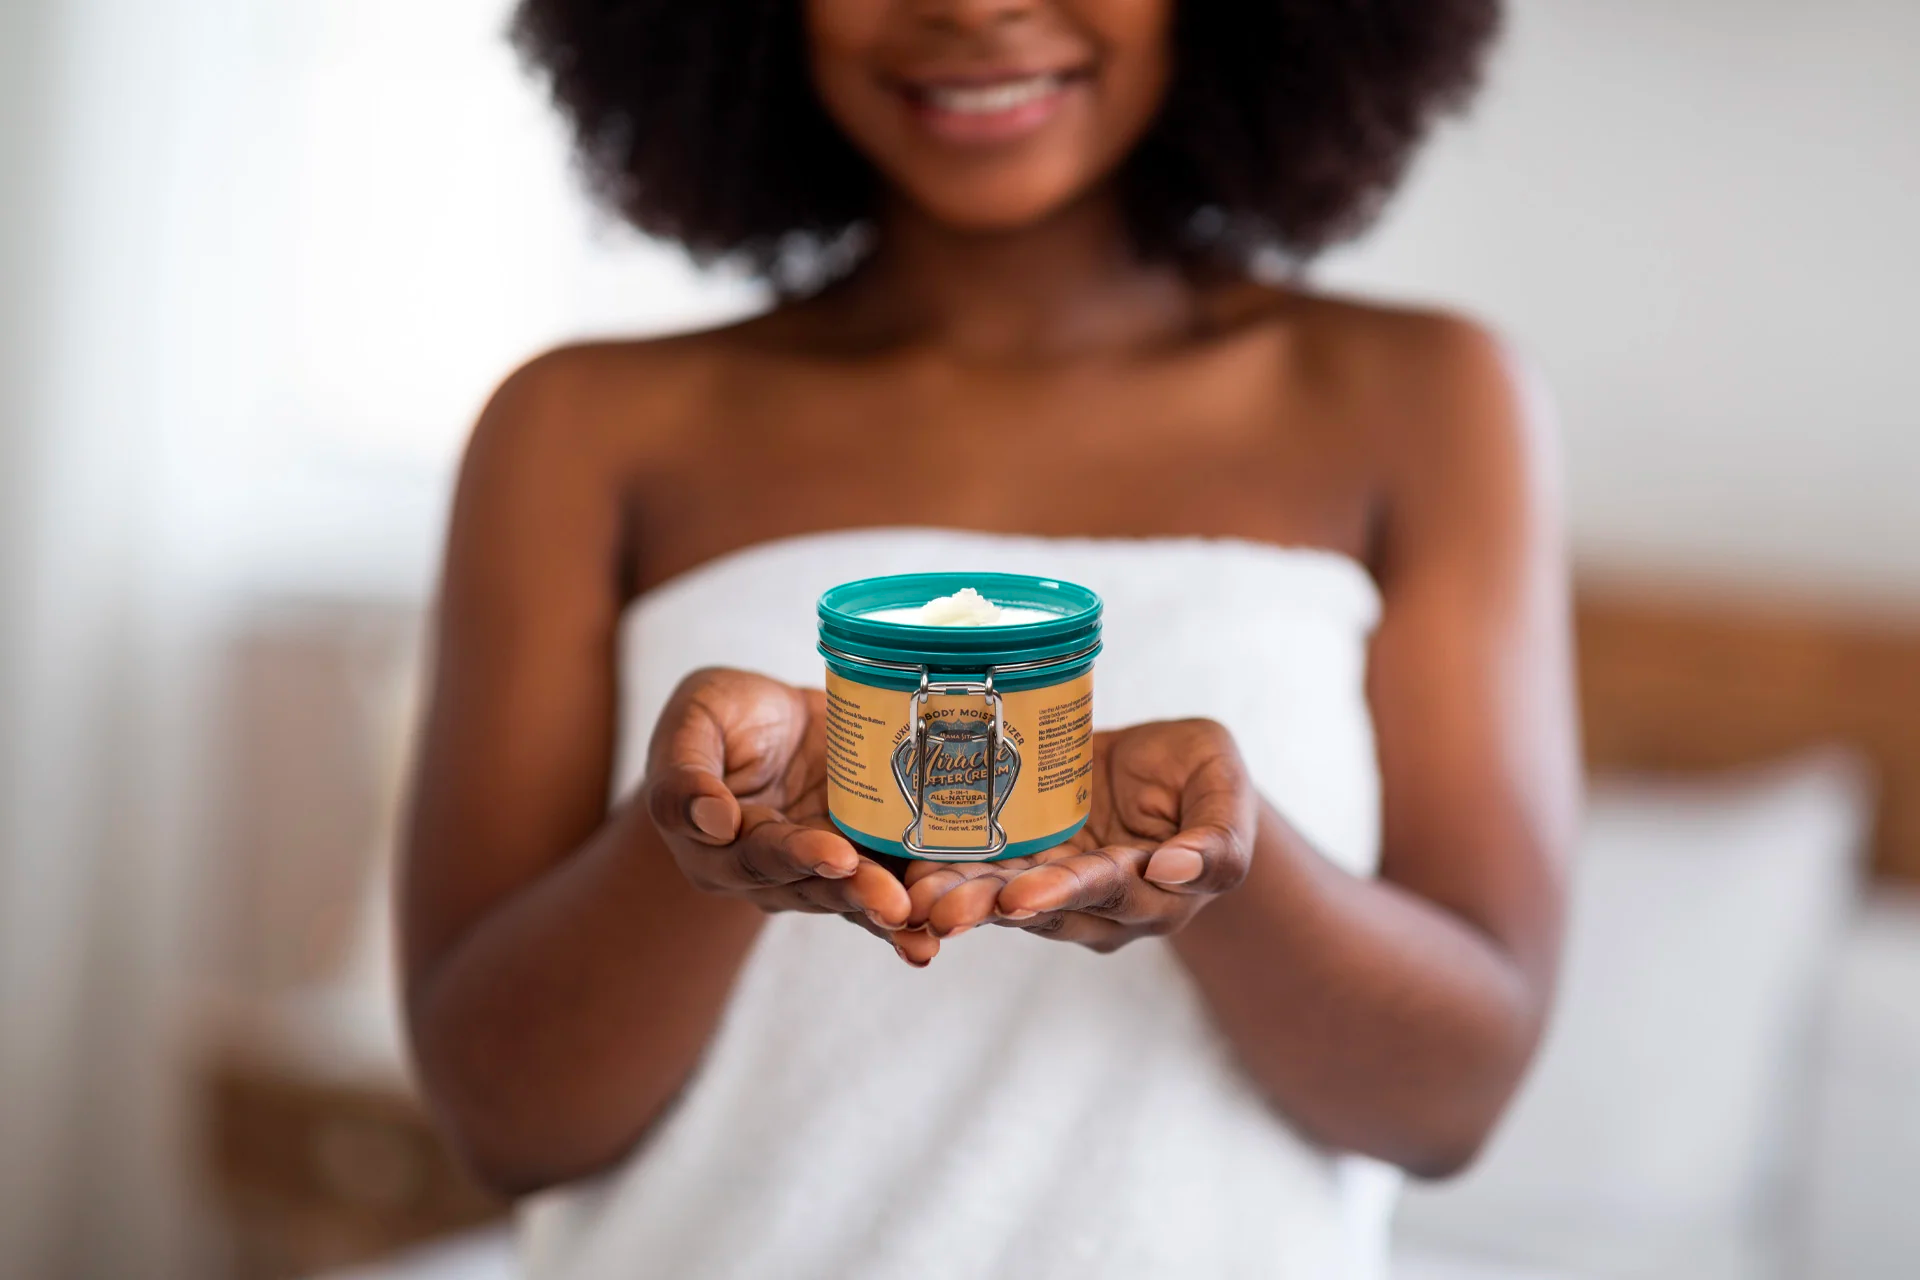 A person wearing a towel holds up a pot of body butter in this example of product photography.